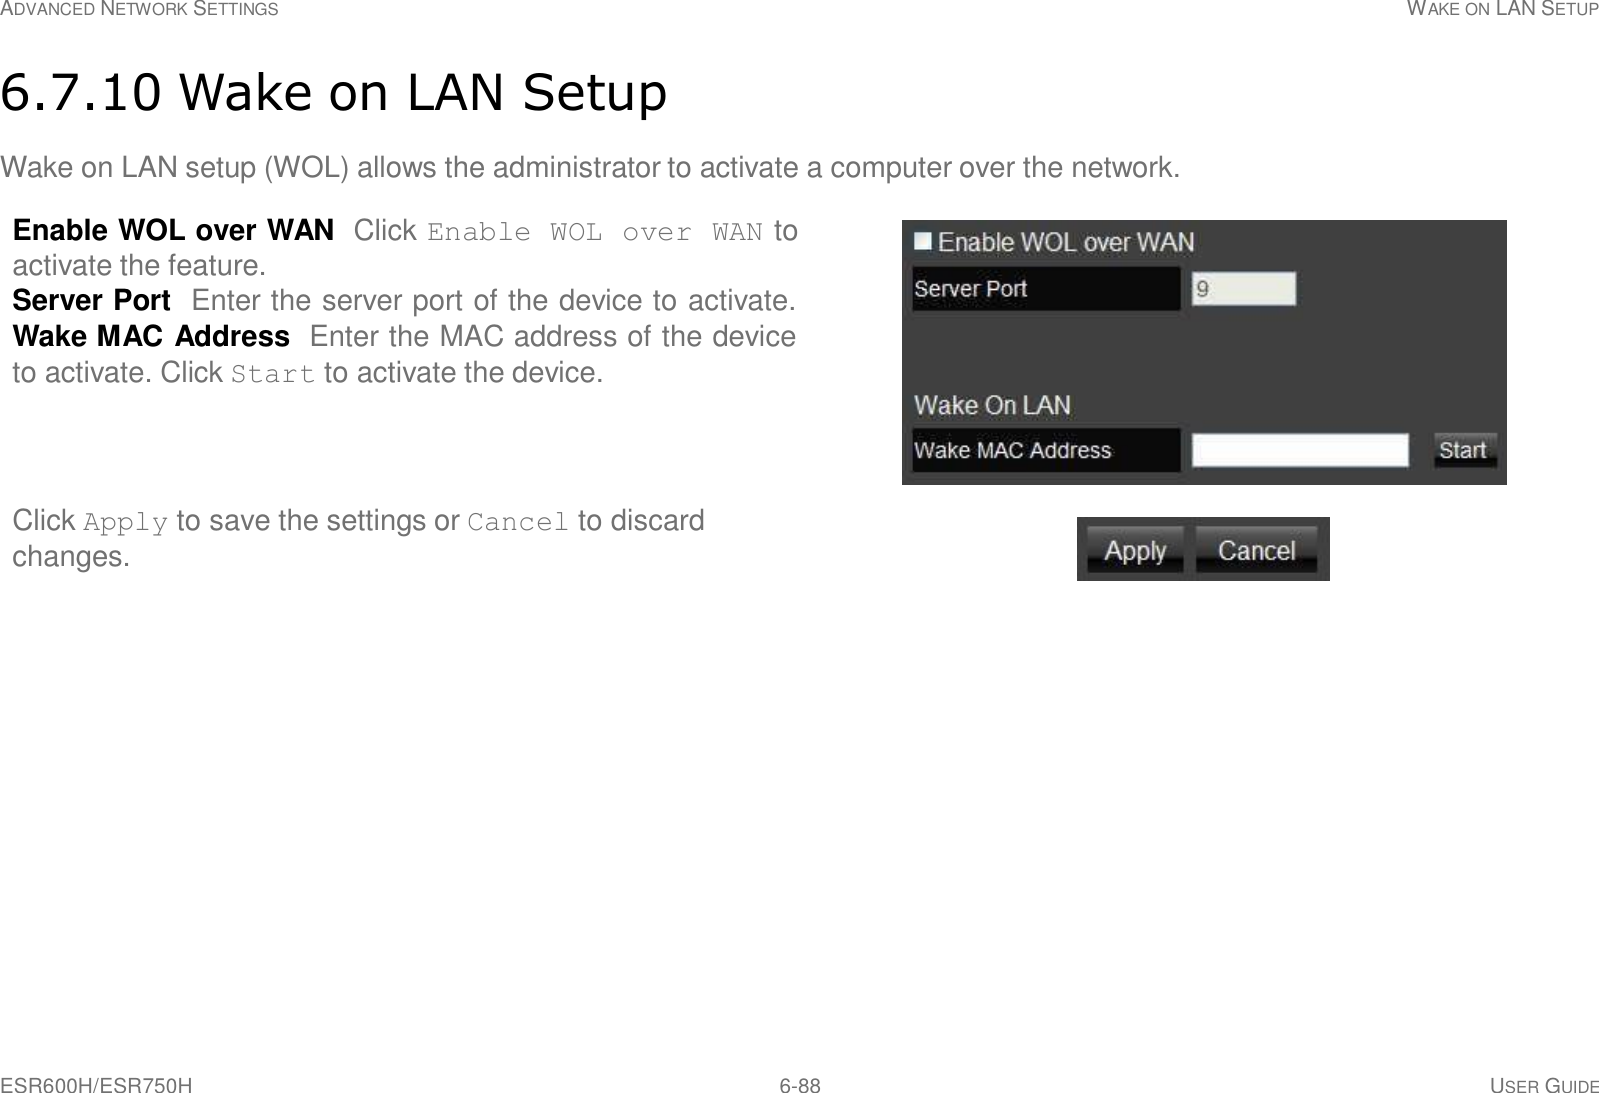 ESR600H/ESR750H 6-88 USER GUIDE ADVANCED NETWORK SETTINGS WAKE ON LAN SETUP     6.7.10 Wake on LAN Setup  Wake on LAN setup (WOL) allows the administrator to activate a computer over the network.  Enable WOL over WAN  Click Enable WOL over WAN to activate the feature. Server Port  Enter the server port of the device to activate. Wake MAC Address  Enter the MAC address of the device to activate. Click Start to activate the device.      Click Apply to save the settings or Cancel to discard changes. 